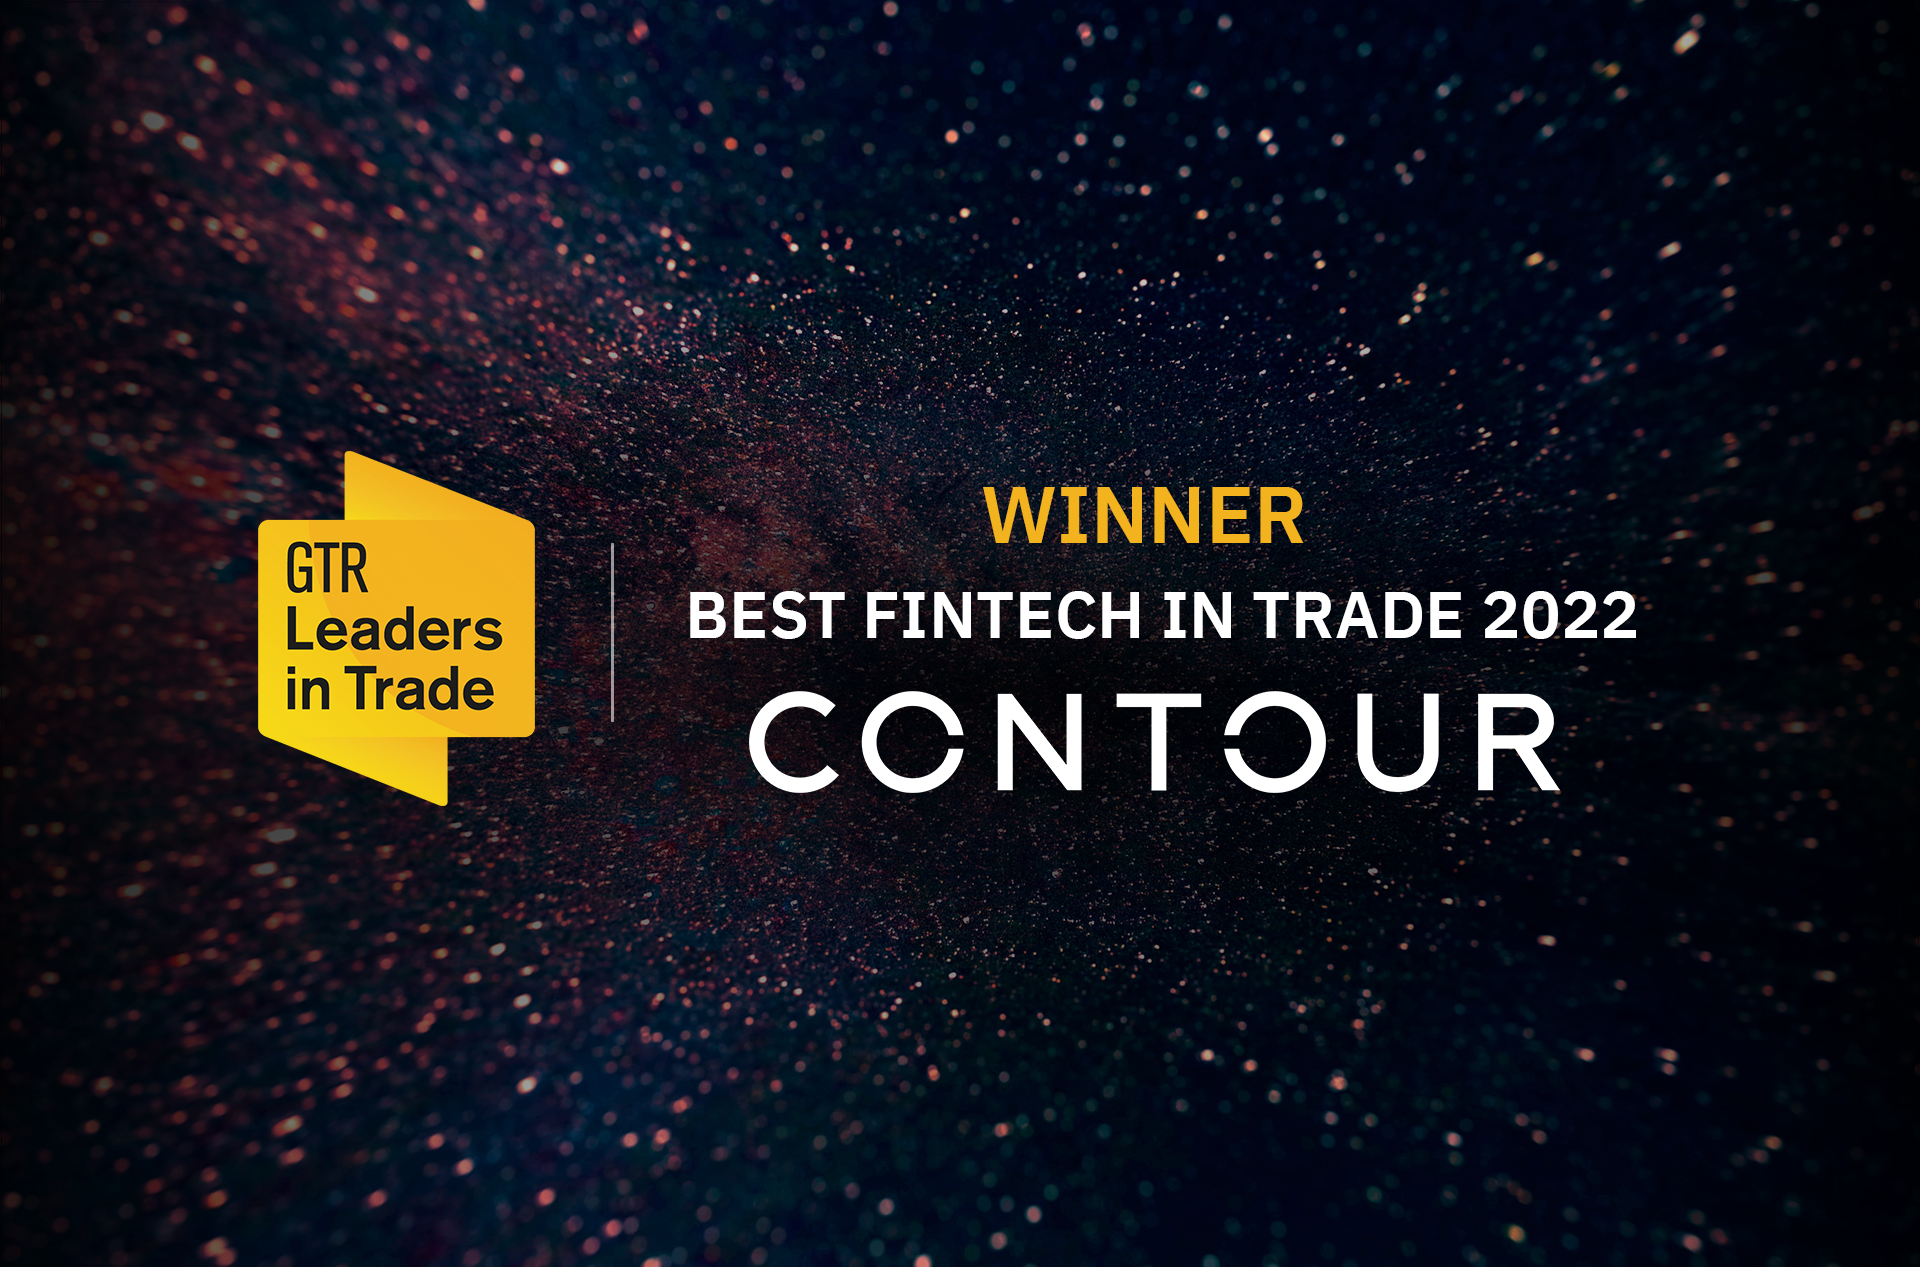 Contour Wins Best Fintech in Trade at GTR Leaders in Trade Awards 2022